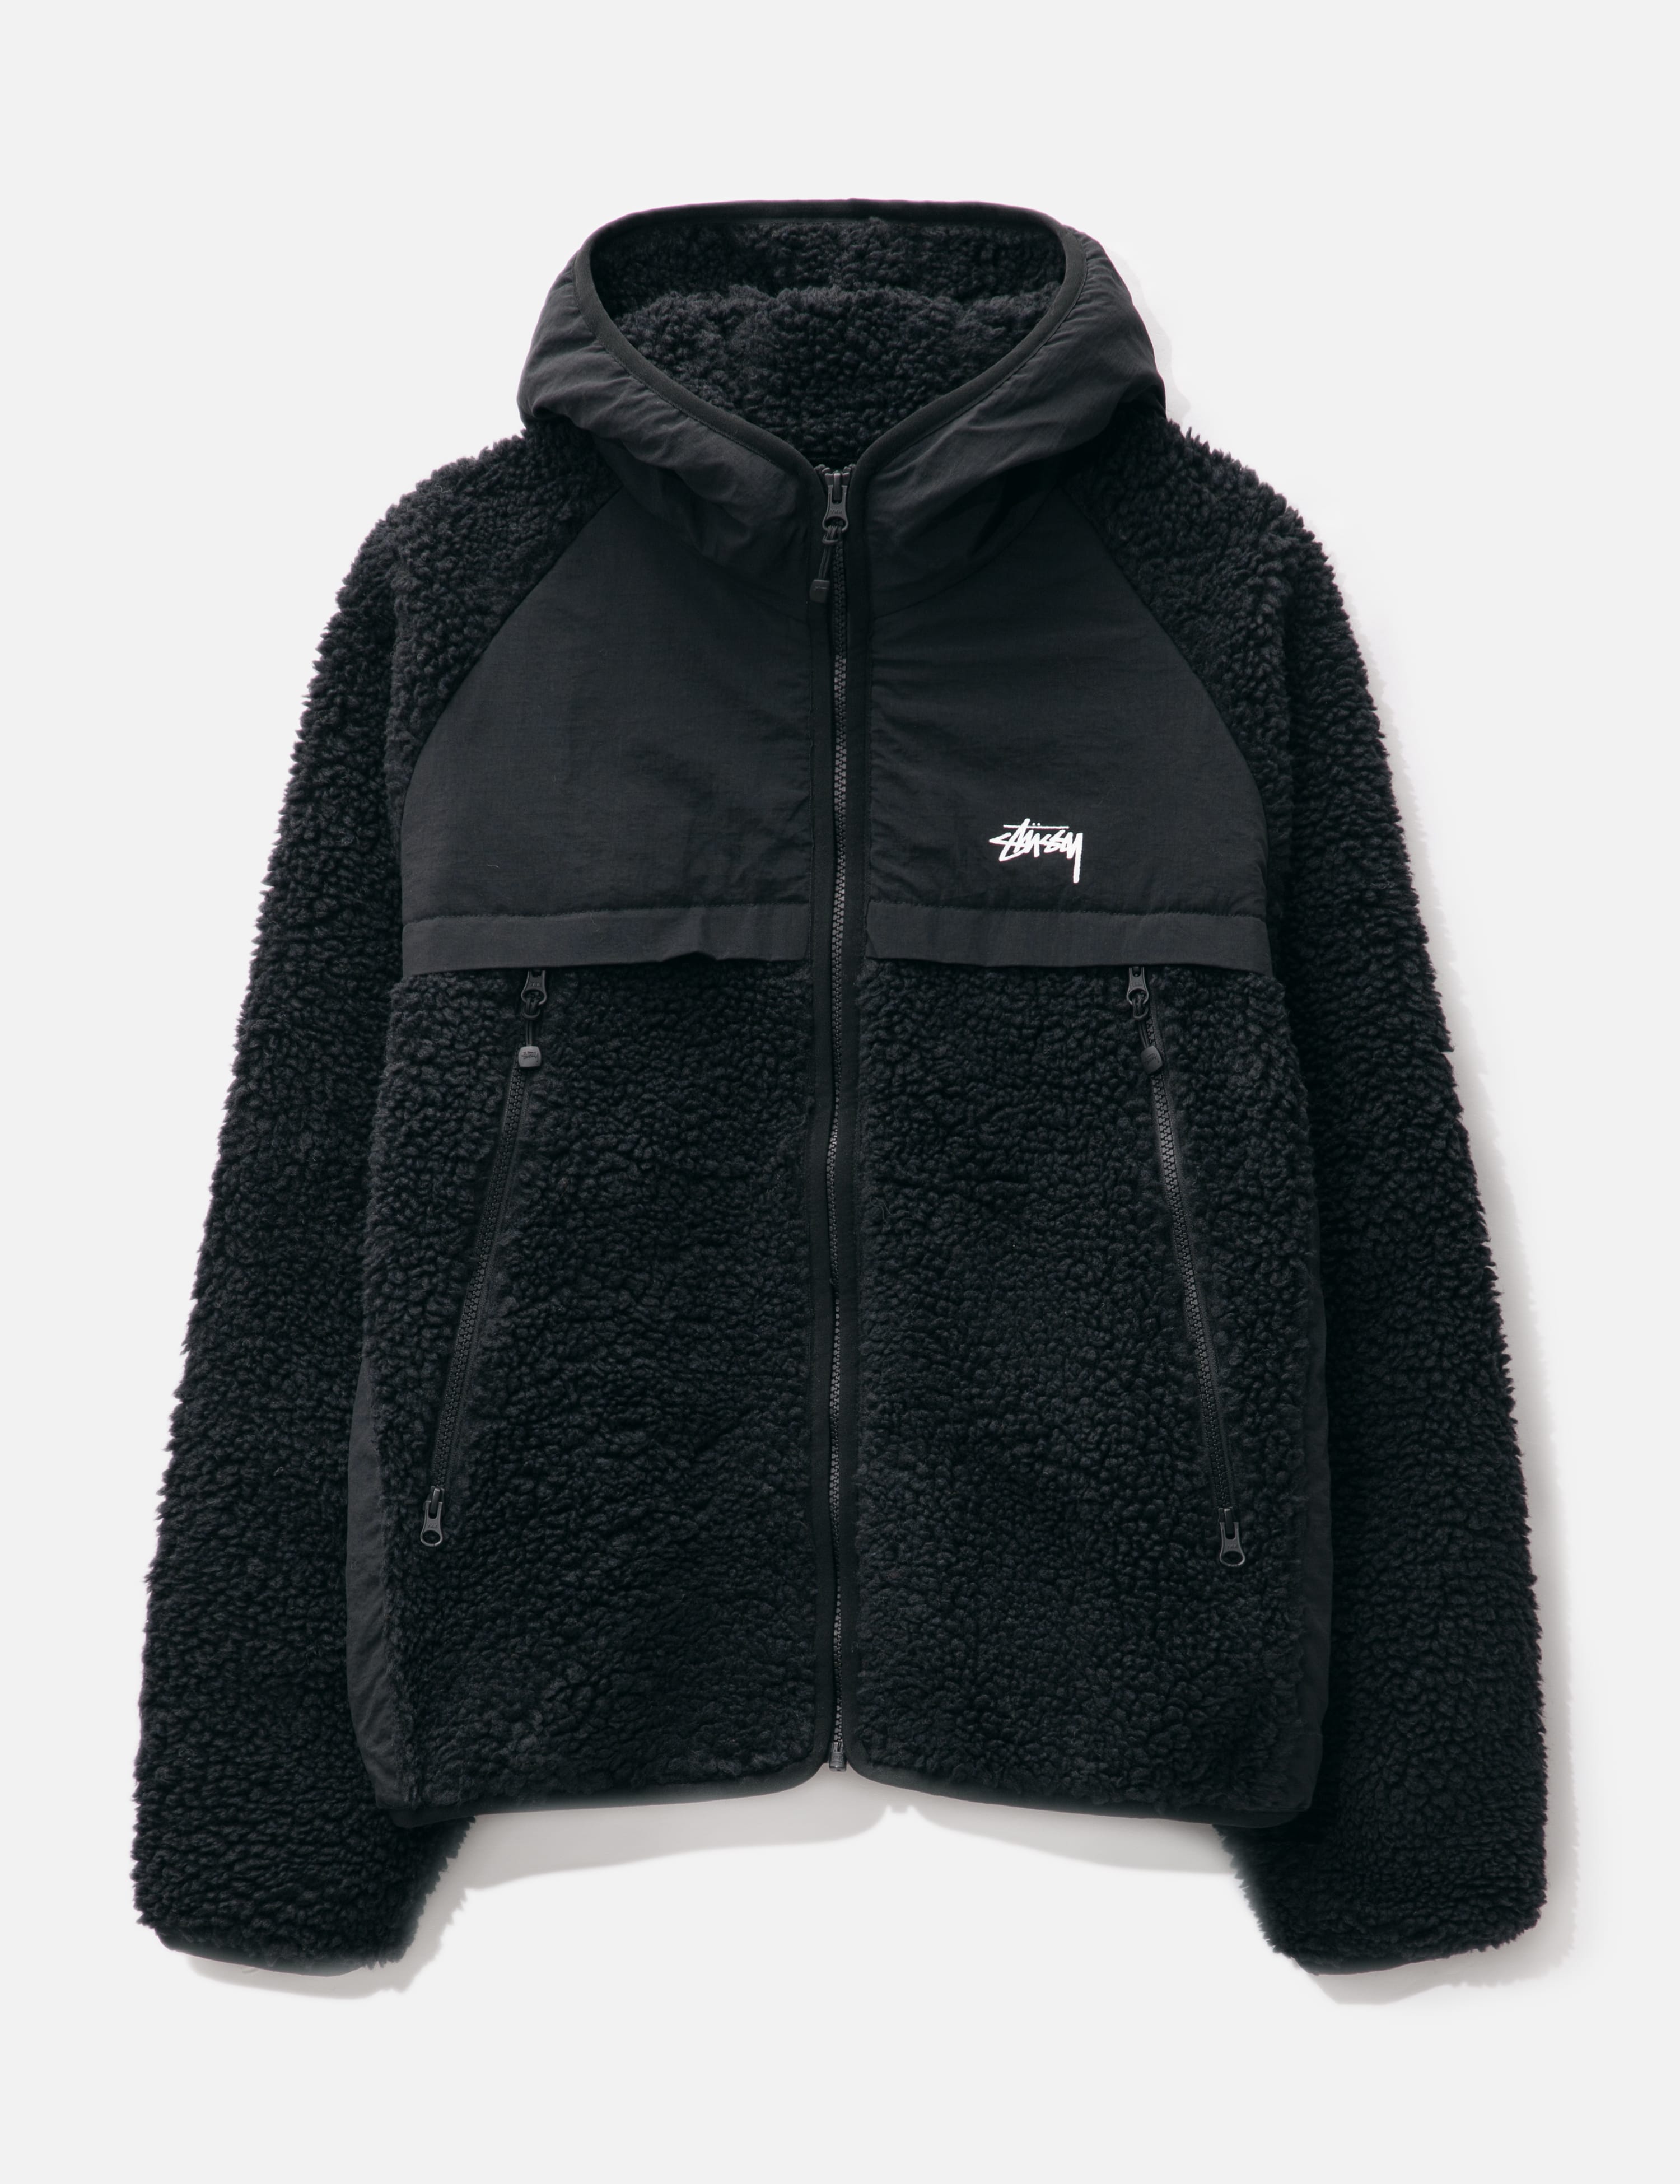 Stüssy - S Quilted Liner Jacket | HBX - Globally Curated Fashion